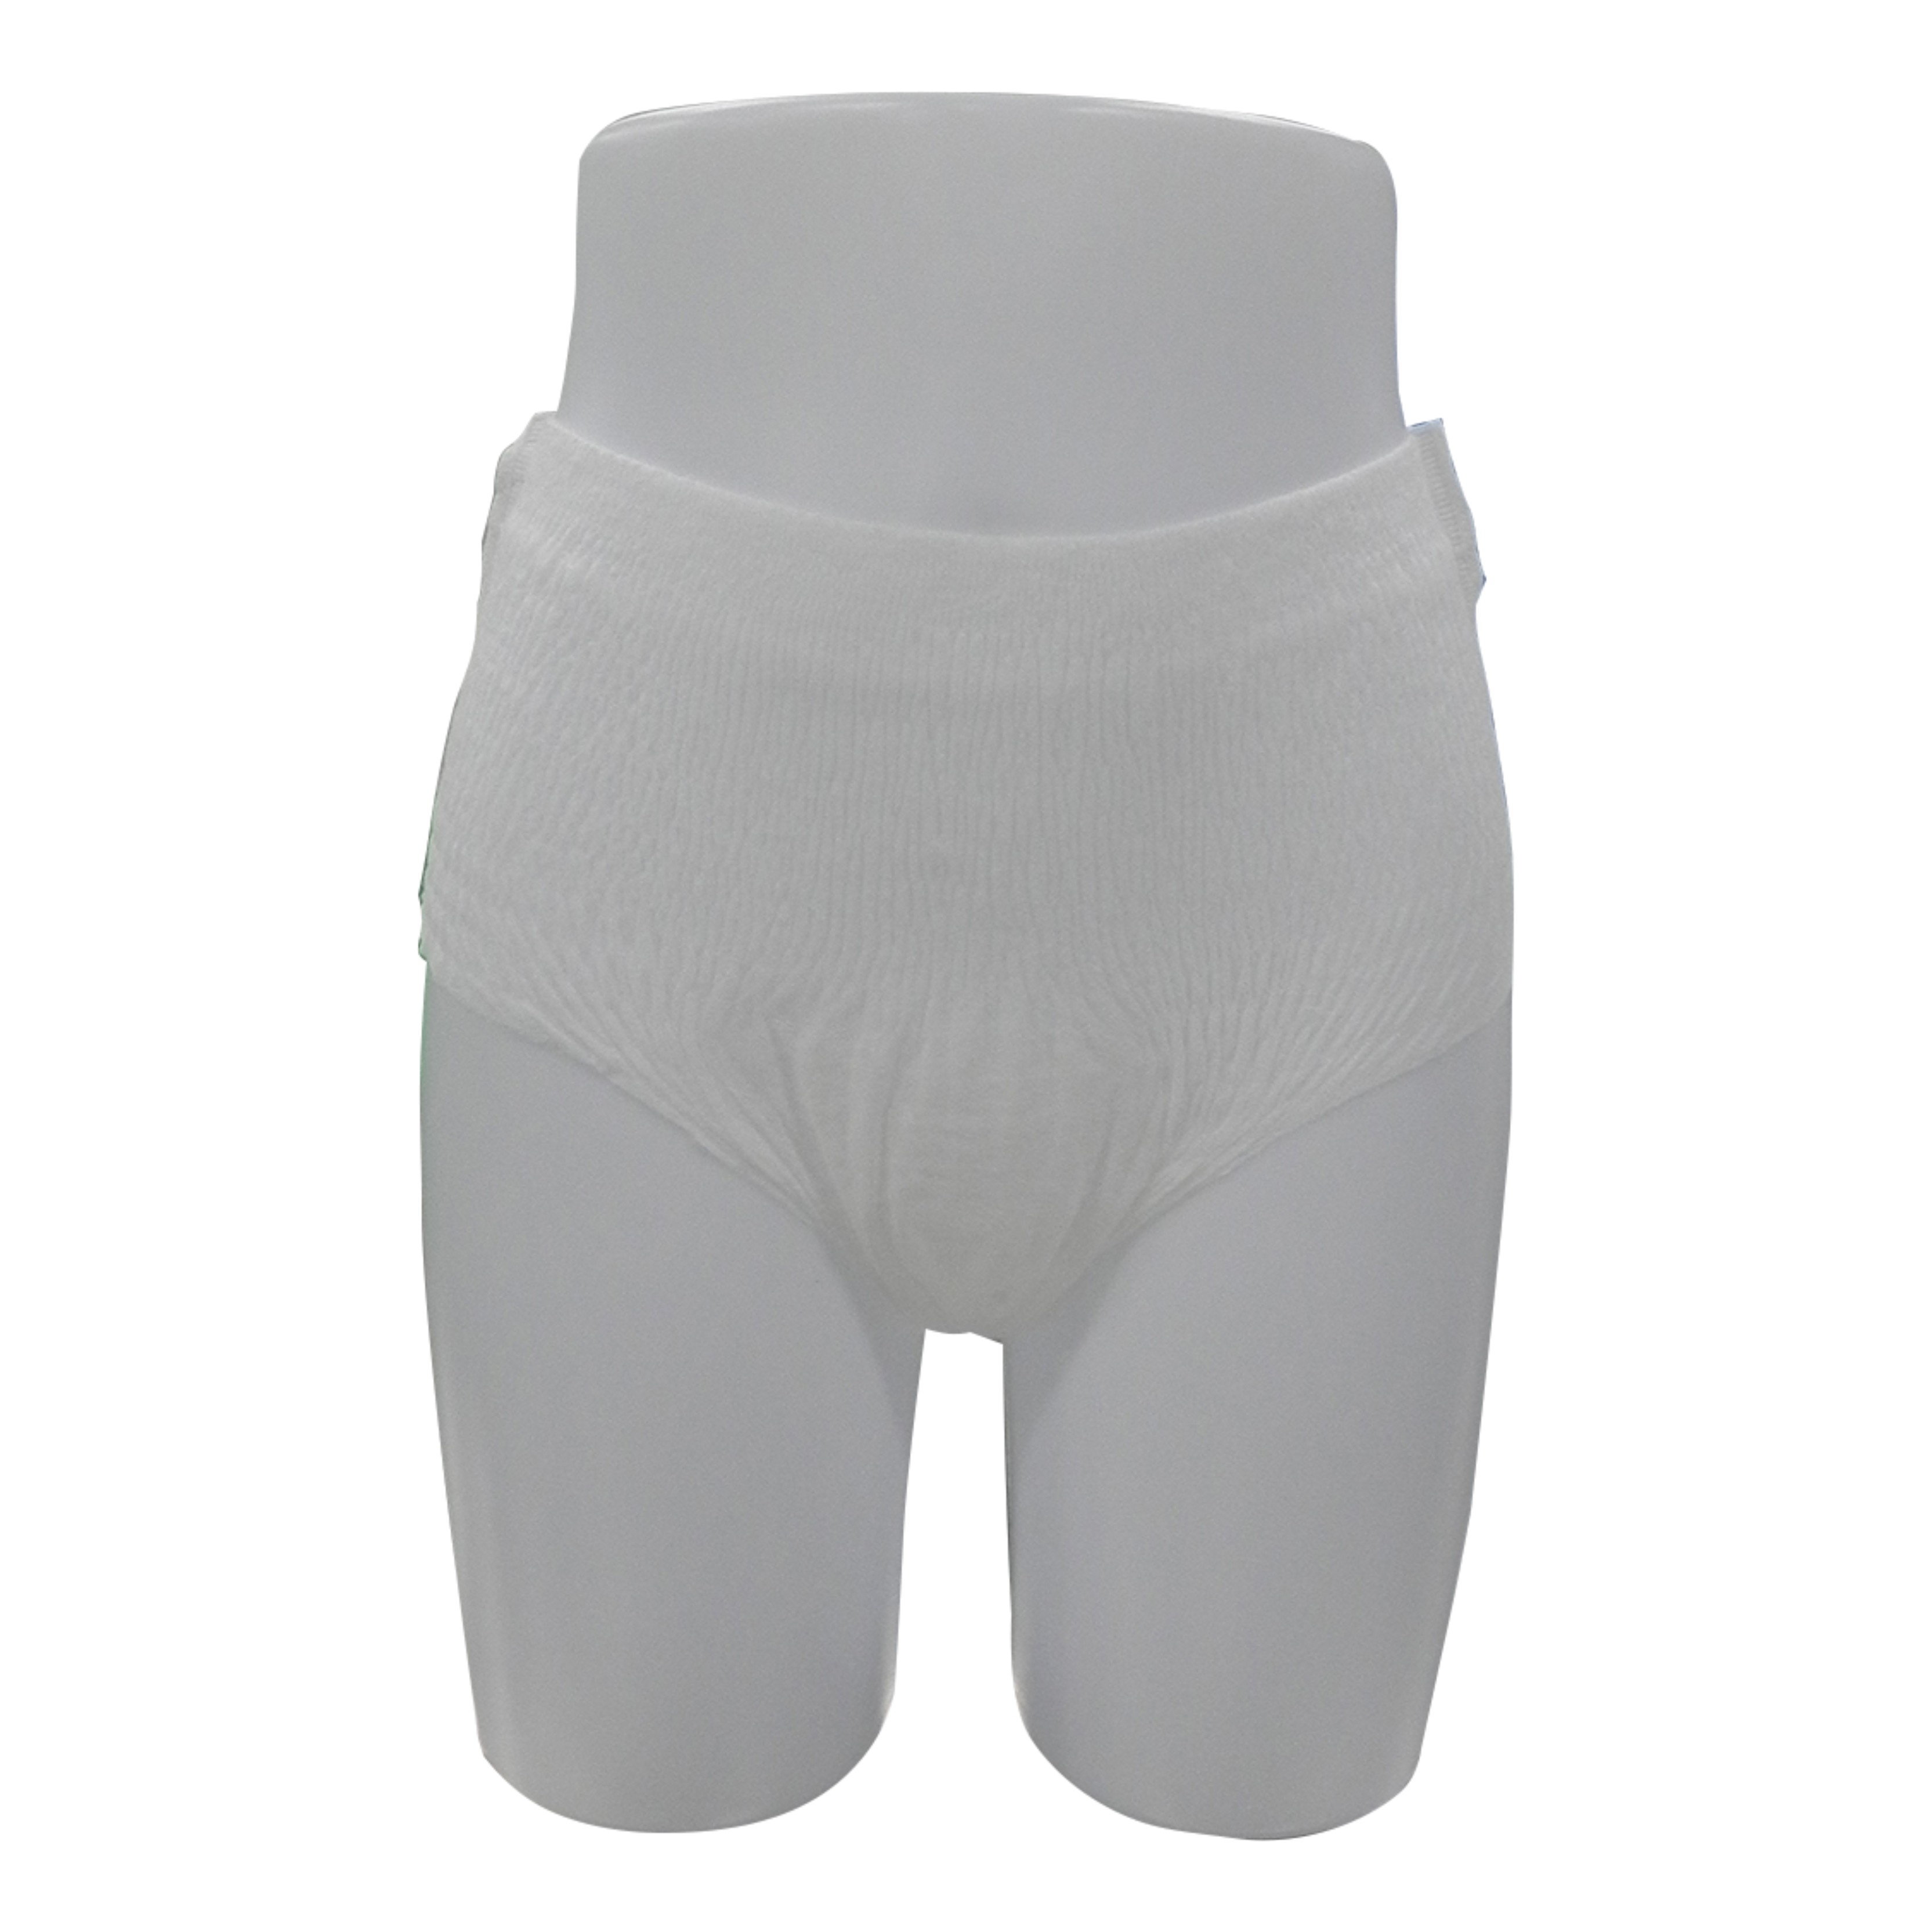 Manufacturer of Sanitary Pads For Men - super sleepy lady women sanitary napkins female period pants in pull up style – Yoho